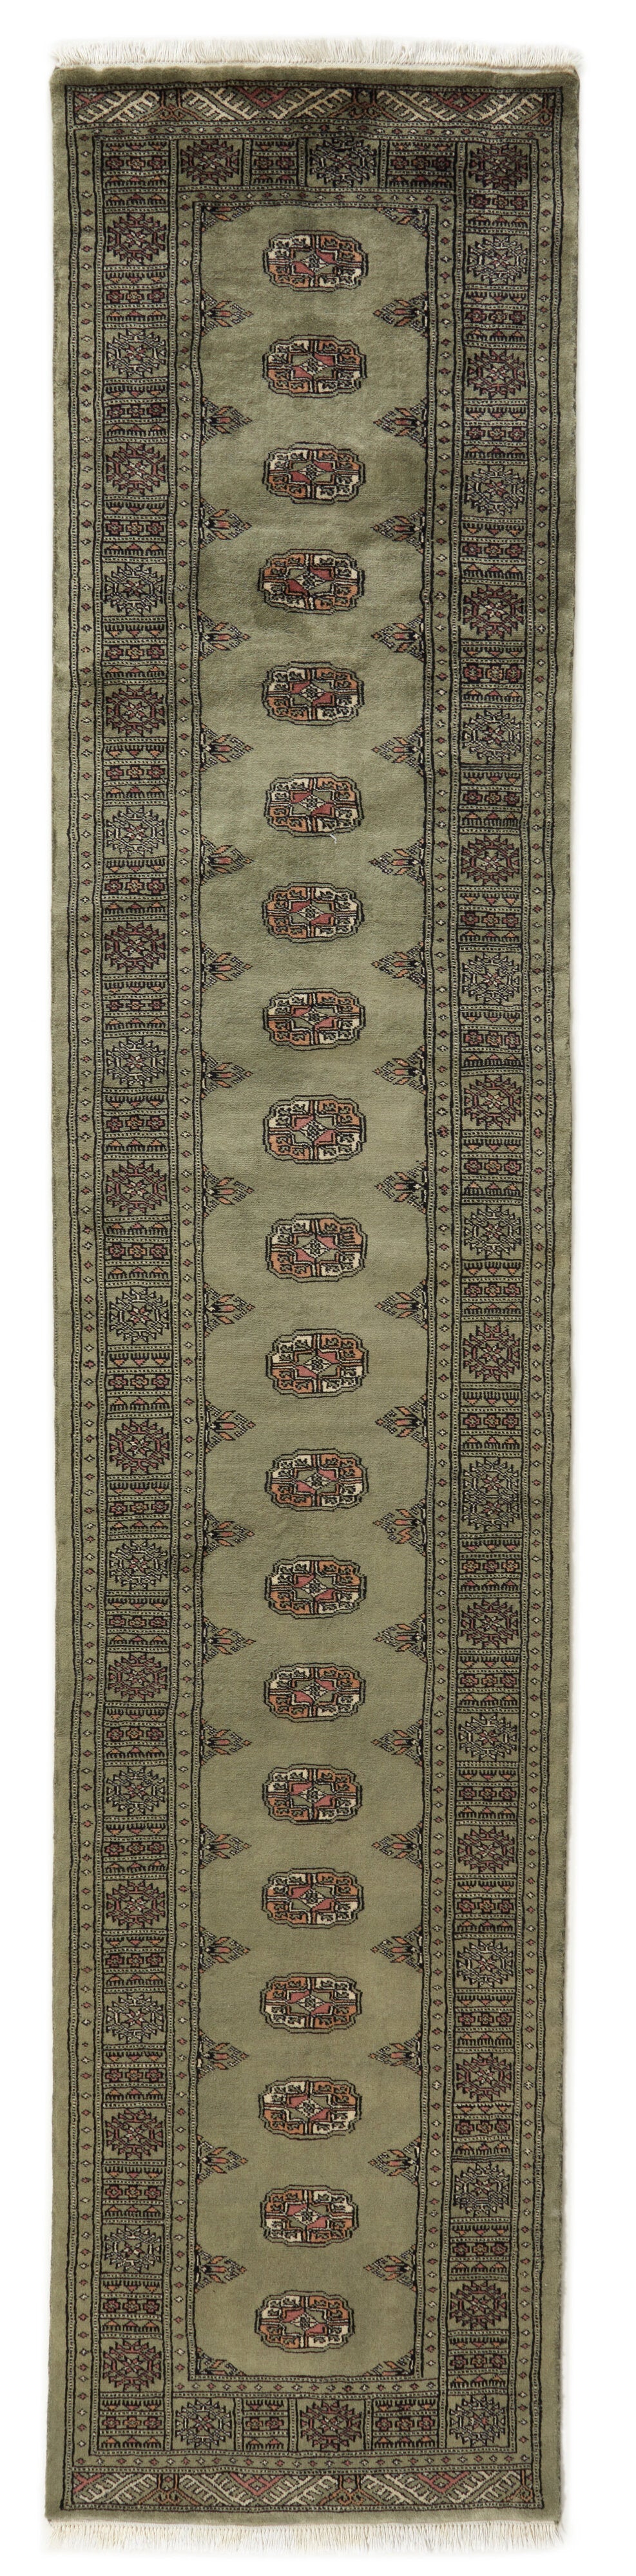 Green Oriental runner with traditional bordered pattern